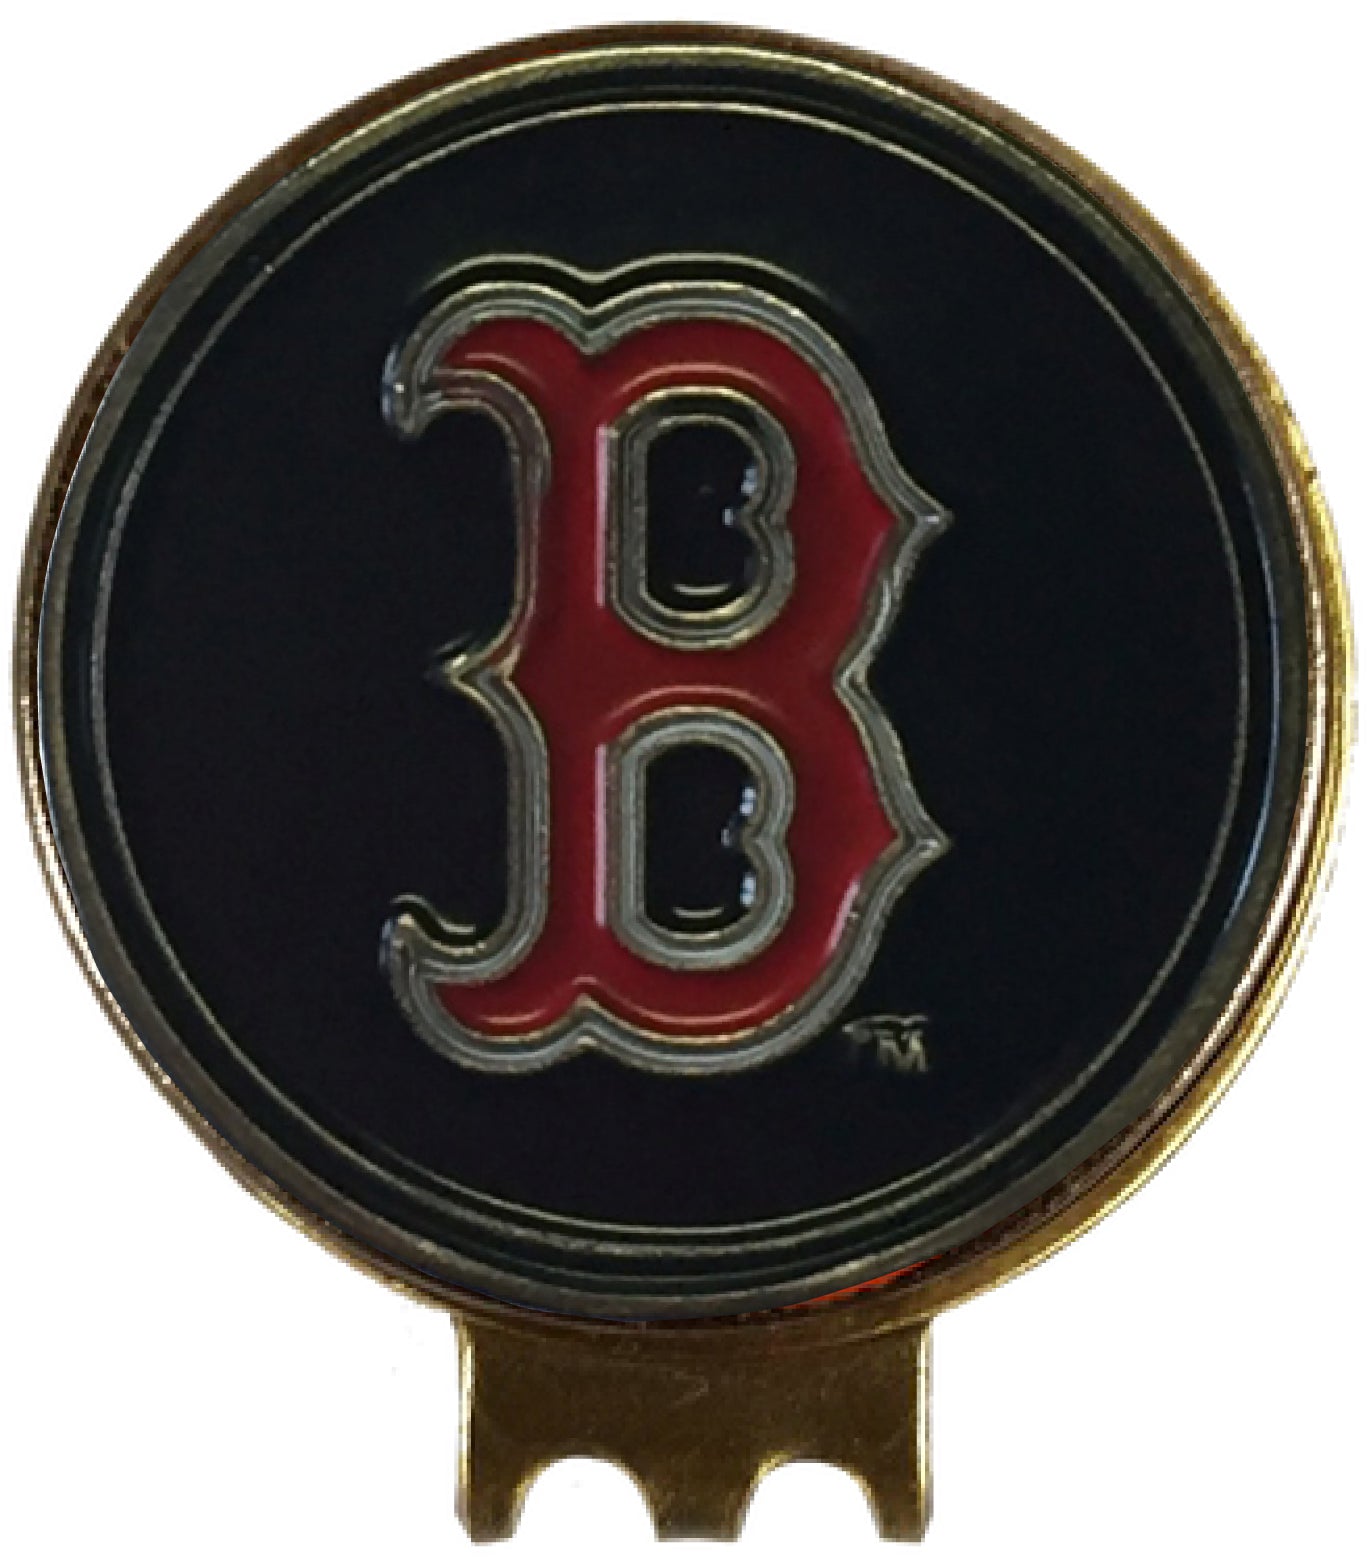 Boston Red Sox Cap Clip with 2 Golf Ball Markers